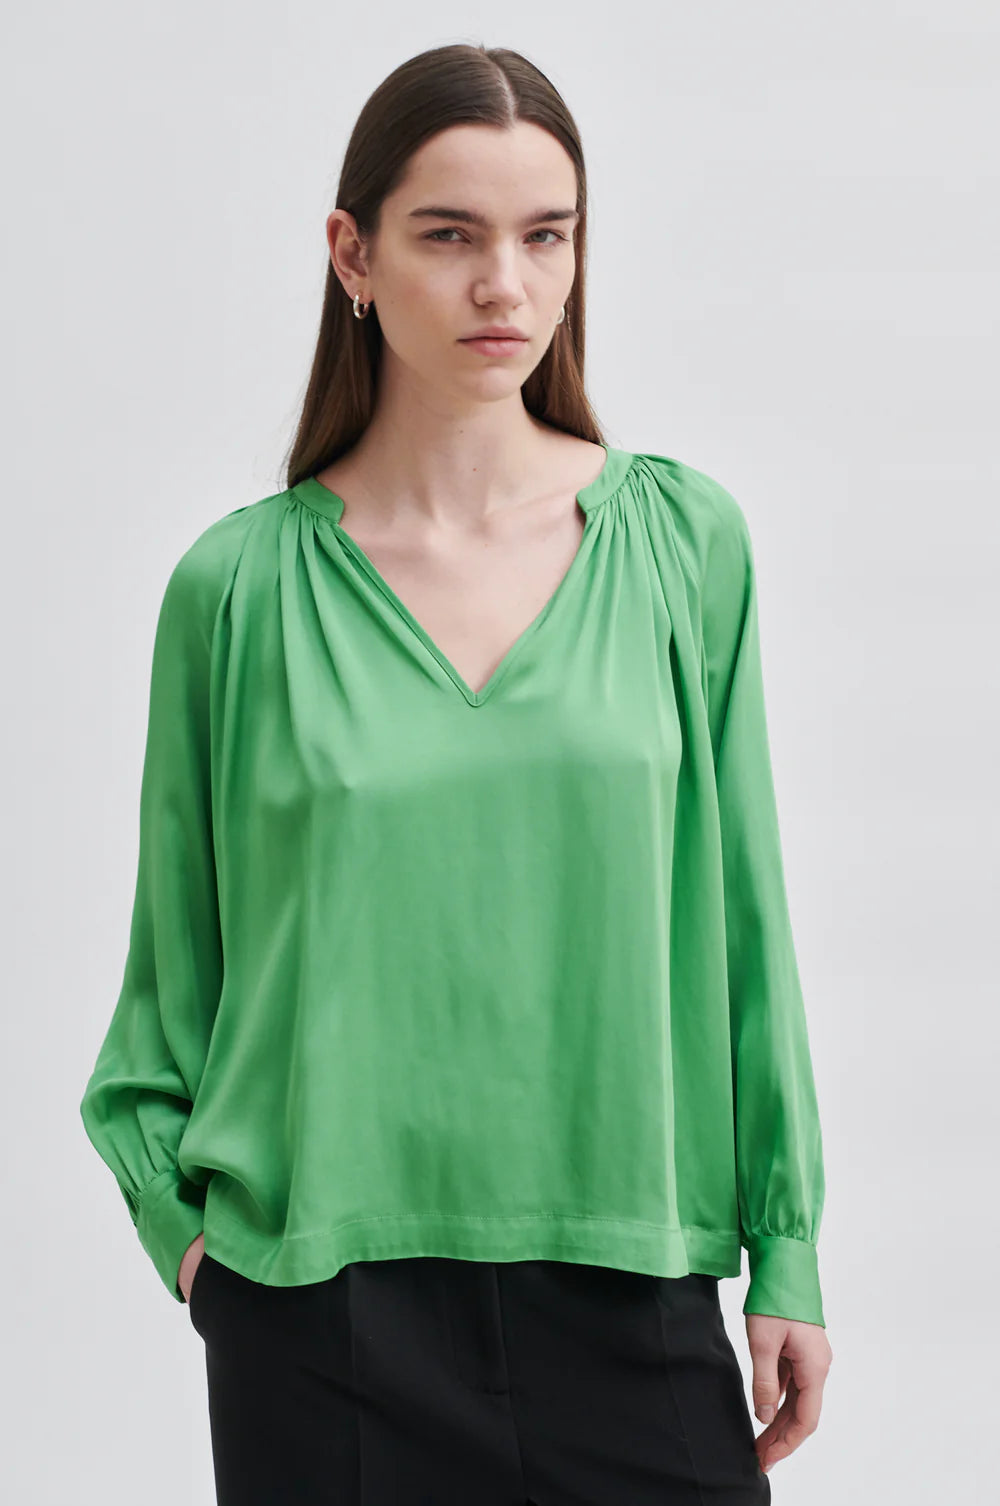 Green satin pull on top with notch neck raglan sleeves and double button cuff fastening